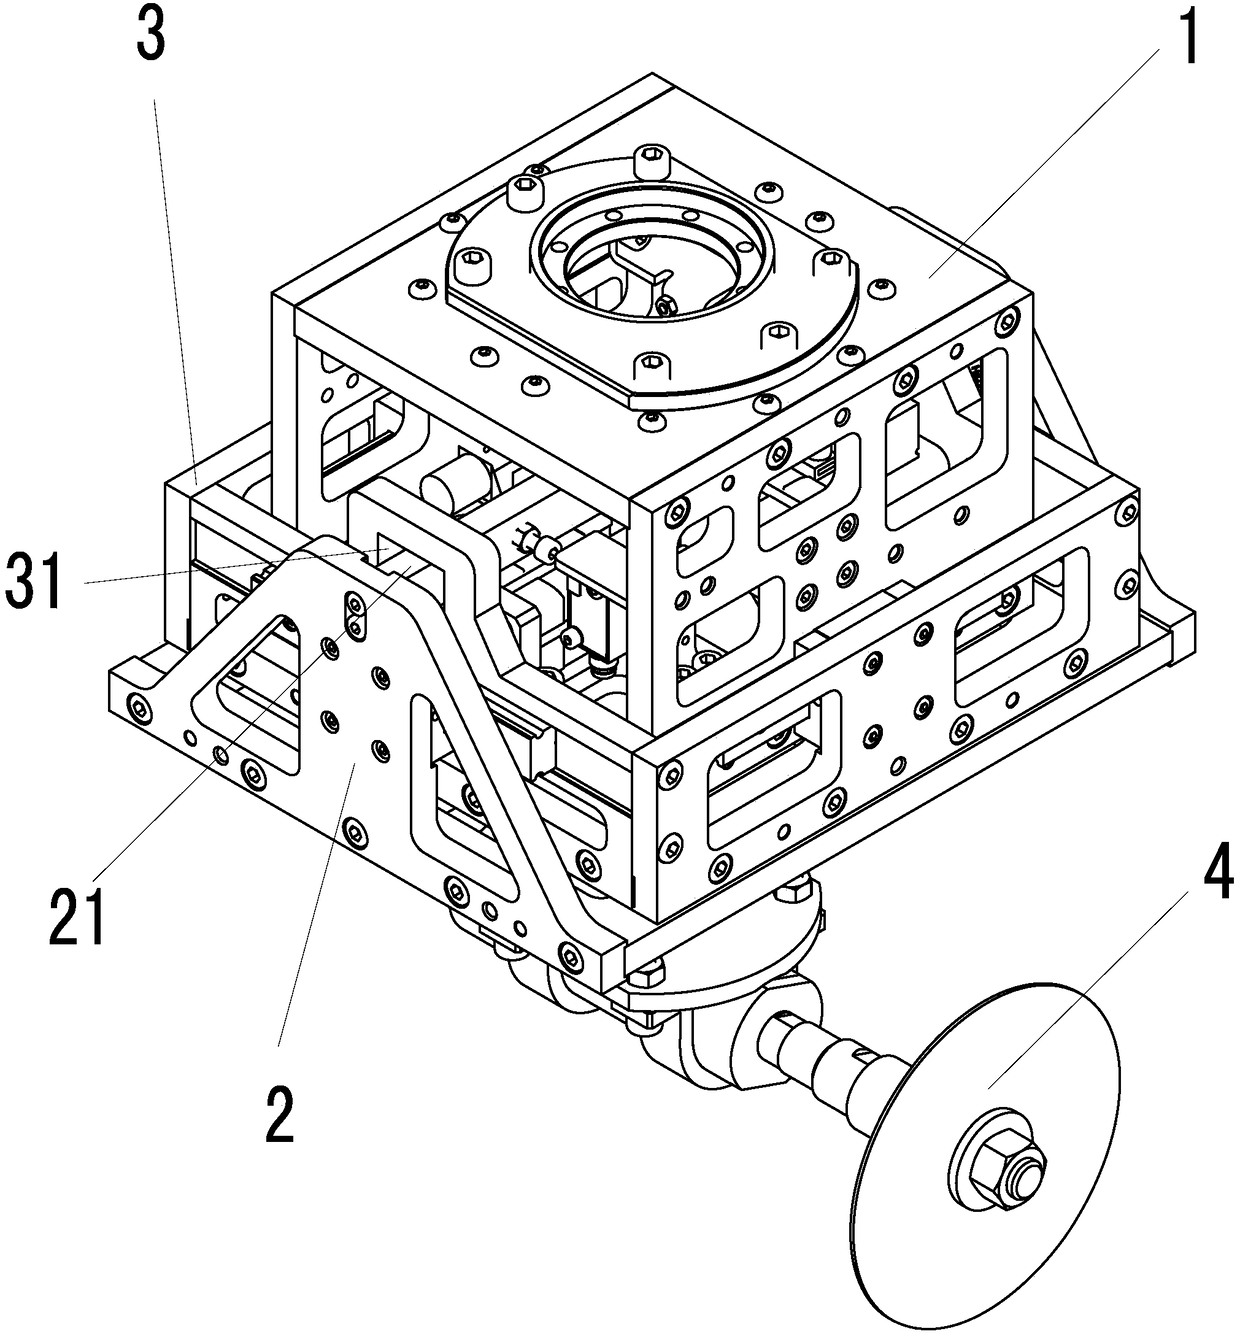 Grinding head device capable of precisely controlling sensing quantity